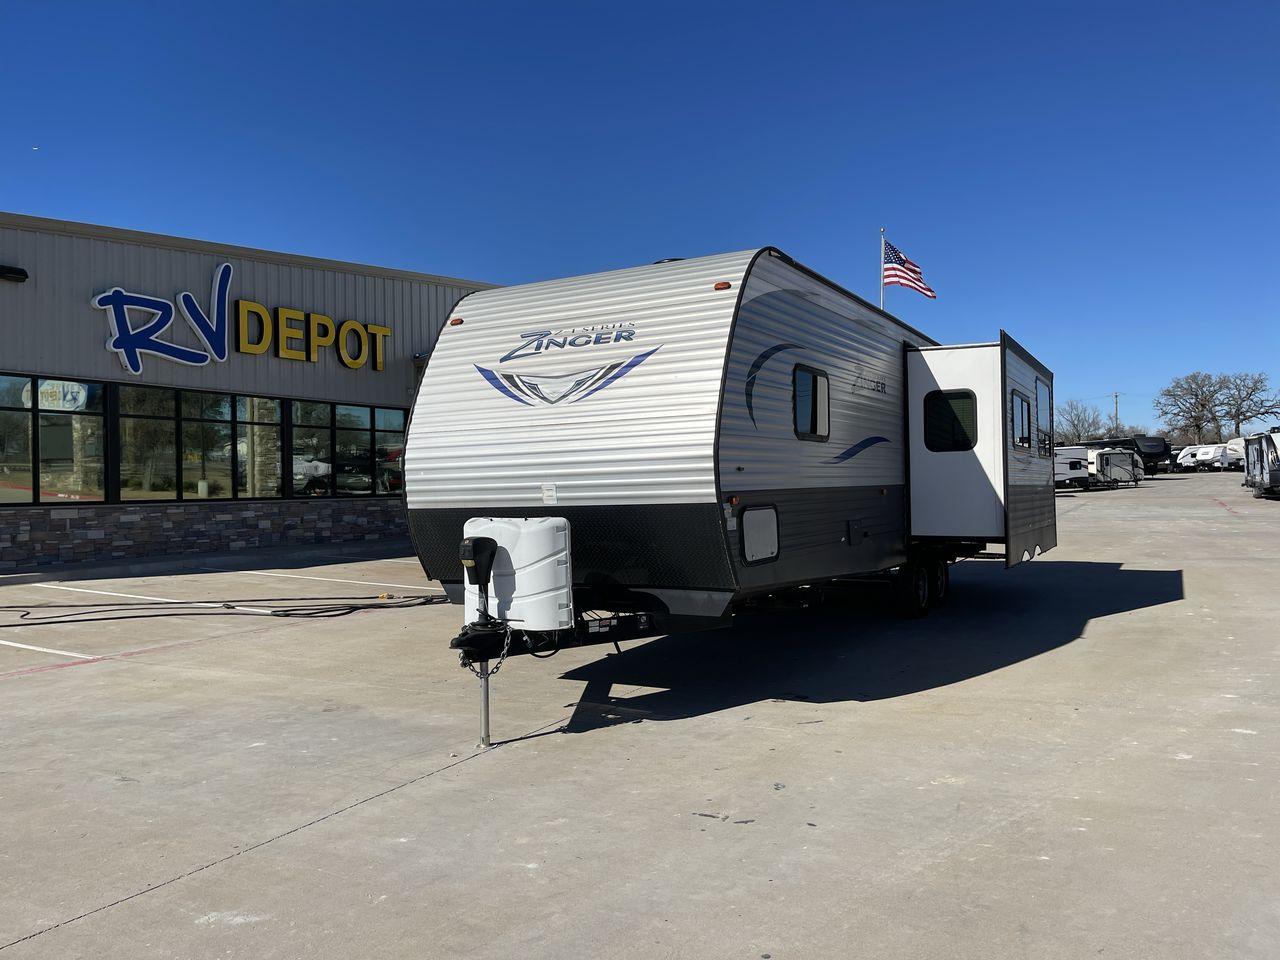 2018 WHITE KEYSTONE ZINGER 280RK (4YDT28021JS) , Length: 32.92 ft. | Dry Weight: 6,570 lbs. | Gross Weight: 9,610 lbs. | Slides: 1 transmission, located at 4319 N Main St, Cleburne, TX, 76033, (817) 678-5133, 32.385960, -97.391212 - Prepare a campout with the family this weekend in this 2018 Keystone Zinger 280RK travel trailer. It features amenities that serve you domestic comfort and convenience on the road! This unit measures 32.92 ft in length, 8 ft in width, 11.17 ft in height, and 6.75 ft in interior height. It has a dry - Photo #0